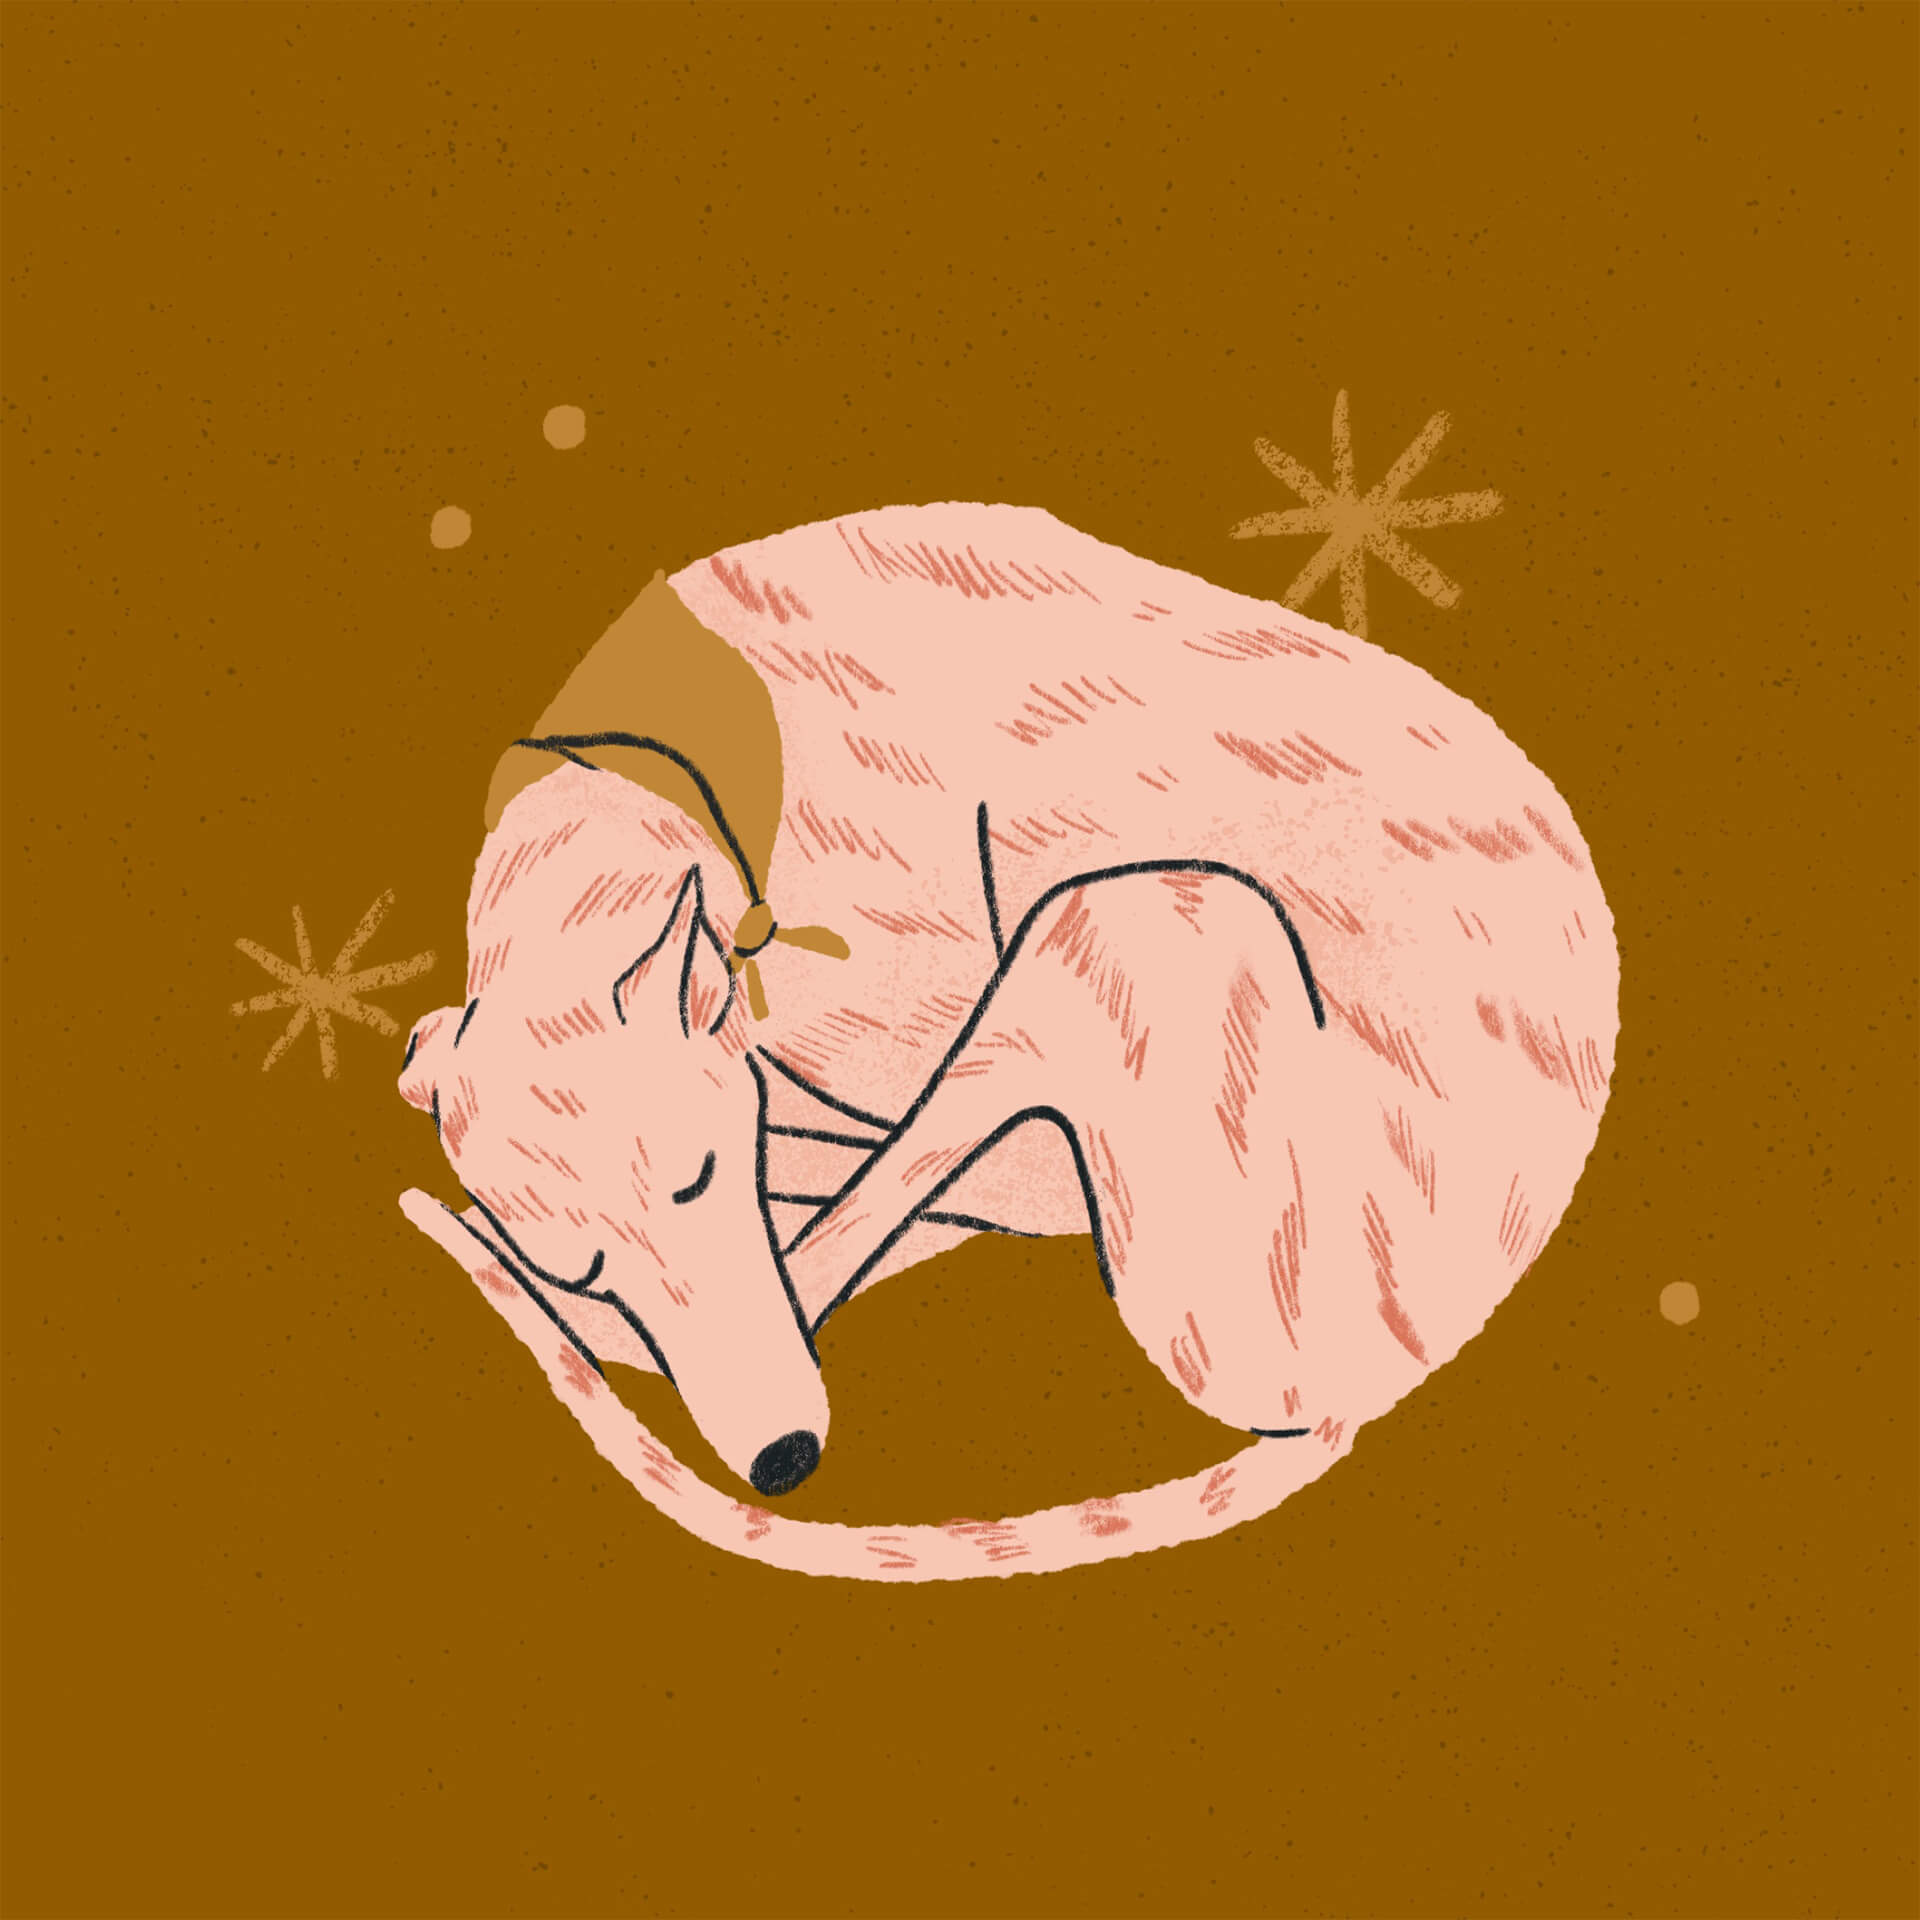 An illustration of a pink greyhound curled up asleep on an orange background